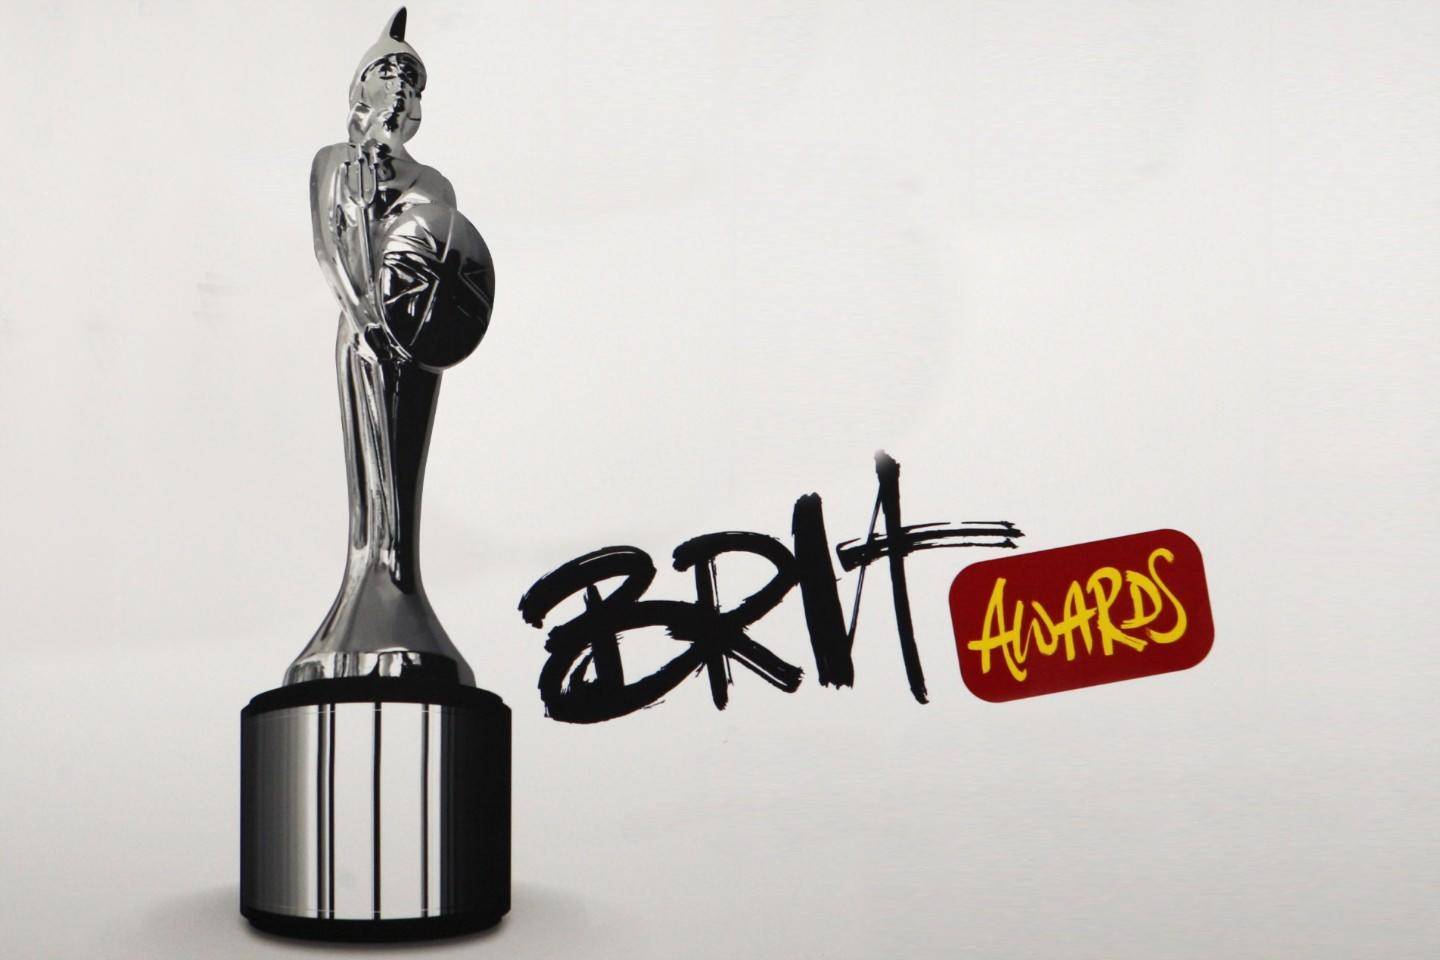 From The Stage To The Spotlight: Meet The Brit Awards' Host!